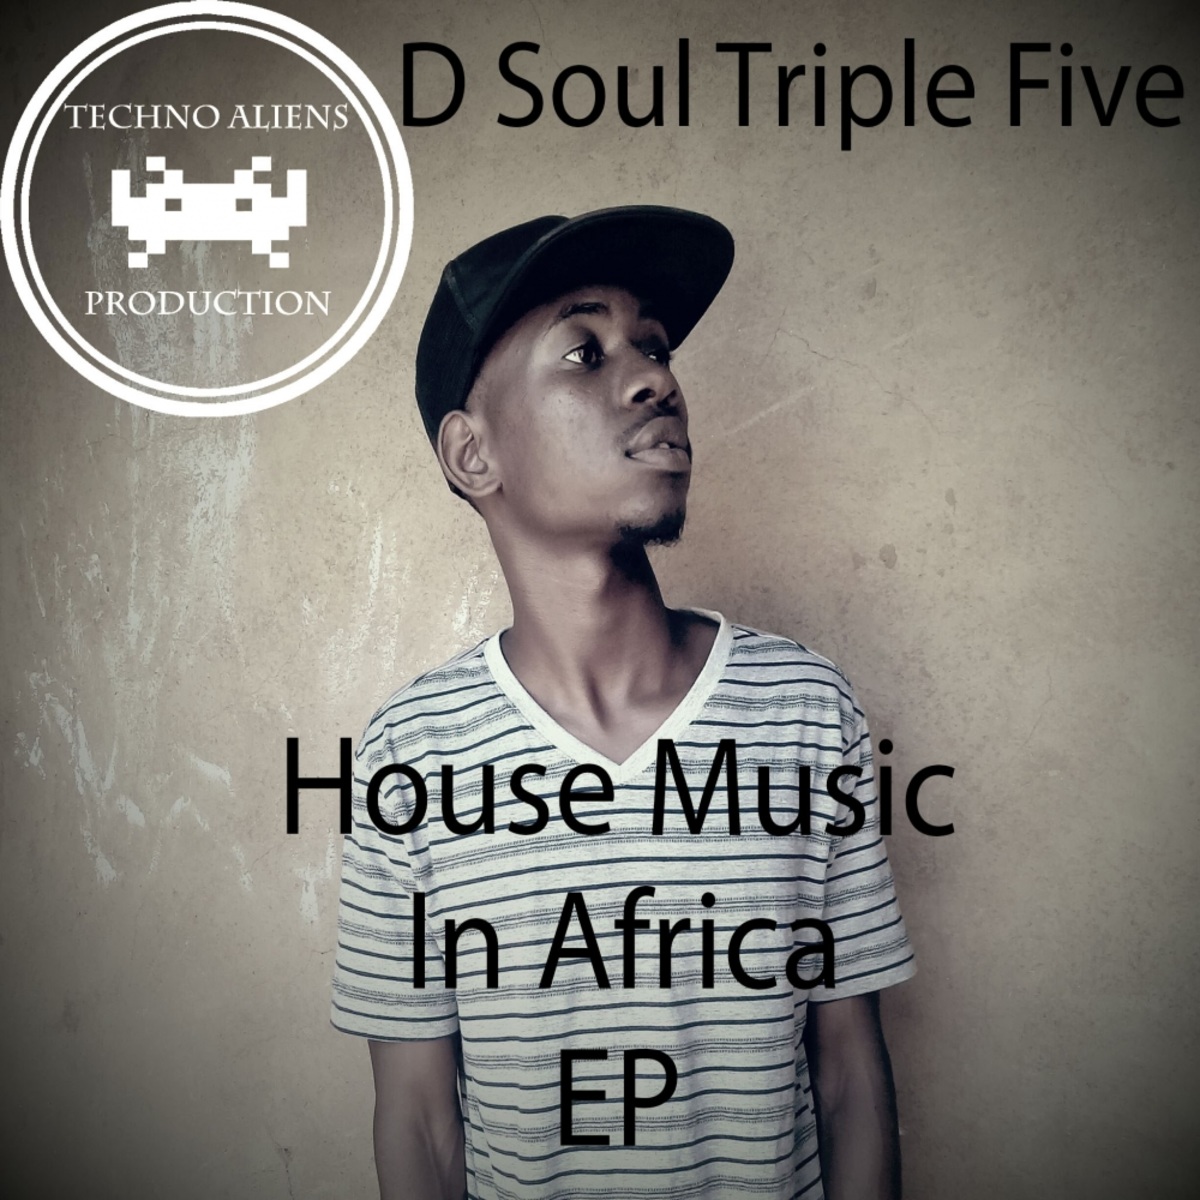 D Soul Triple Five - House Music In Africa EP / Techno Aliens Production